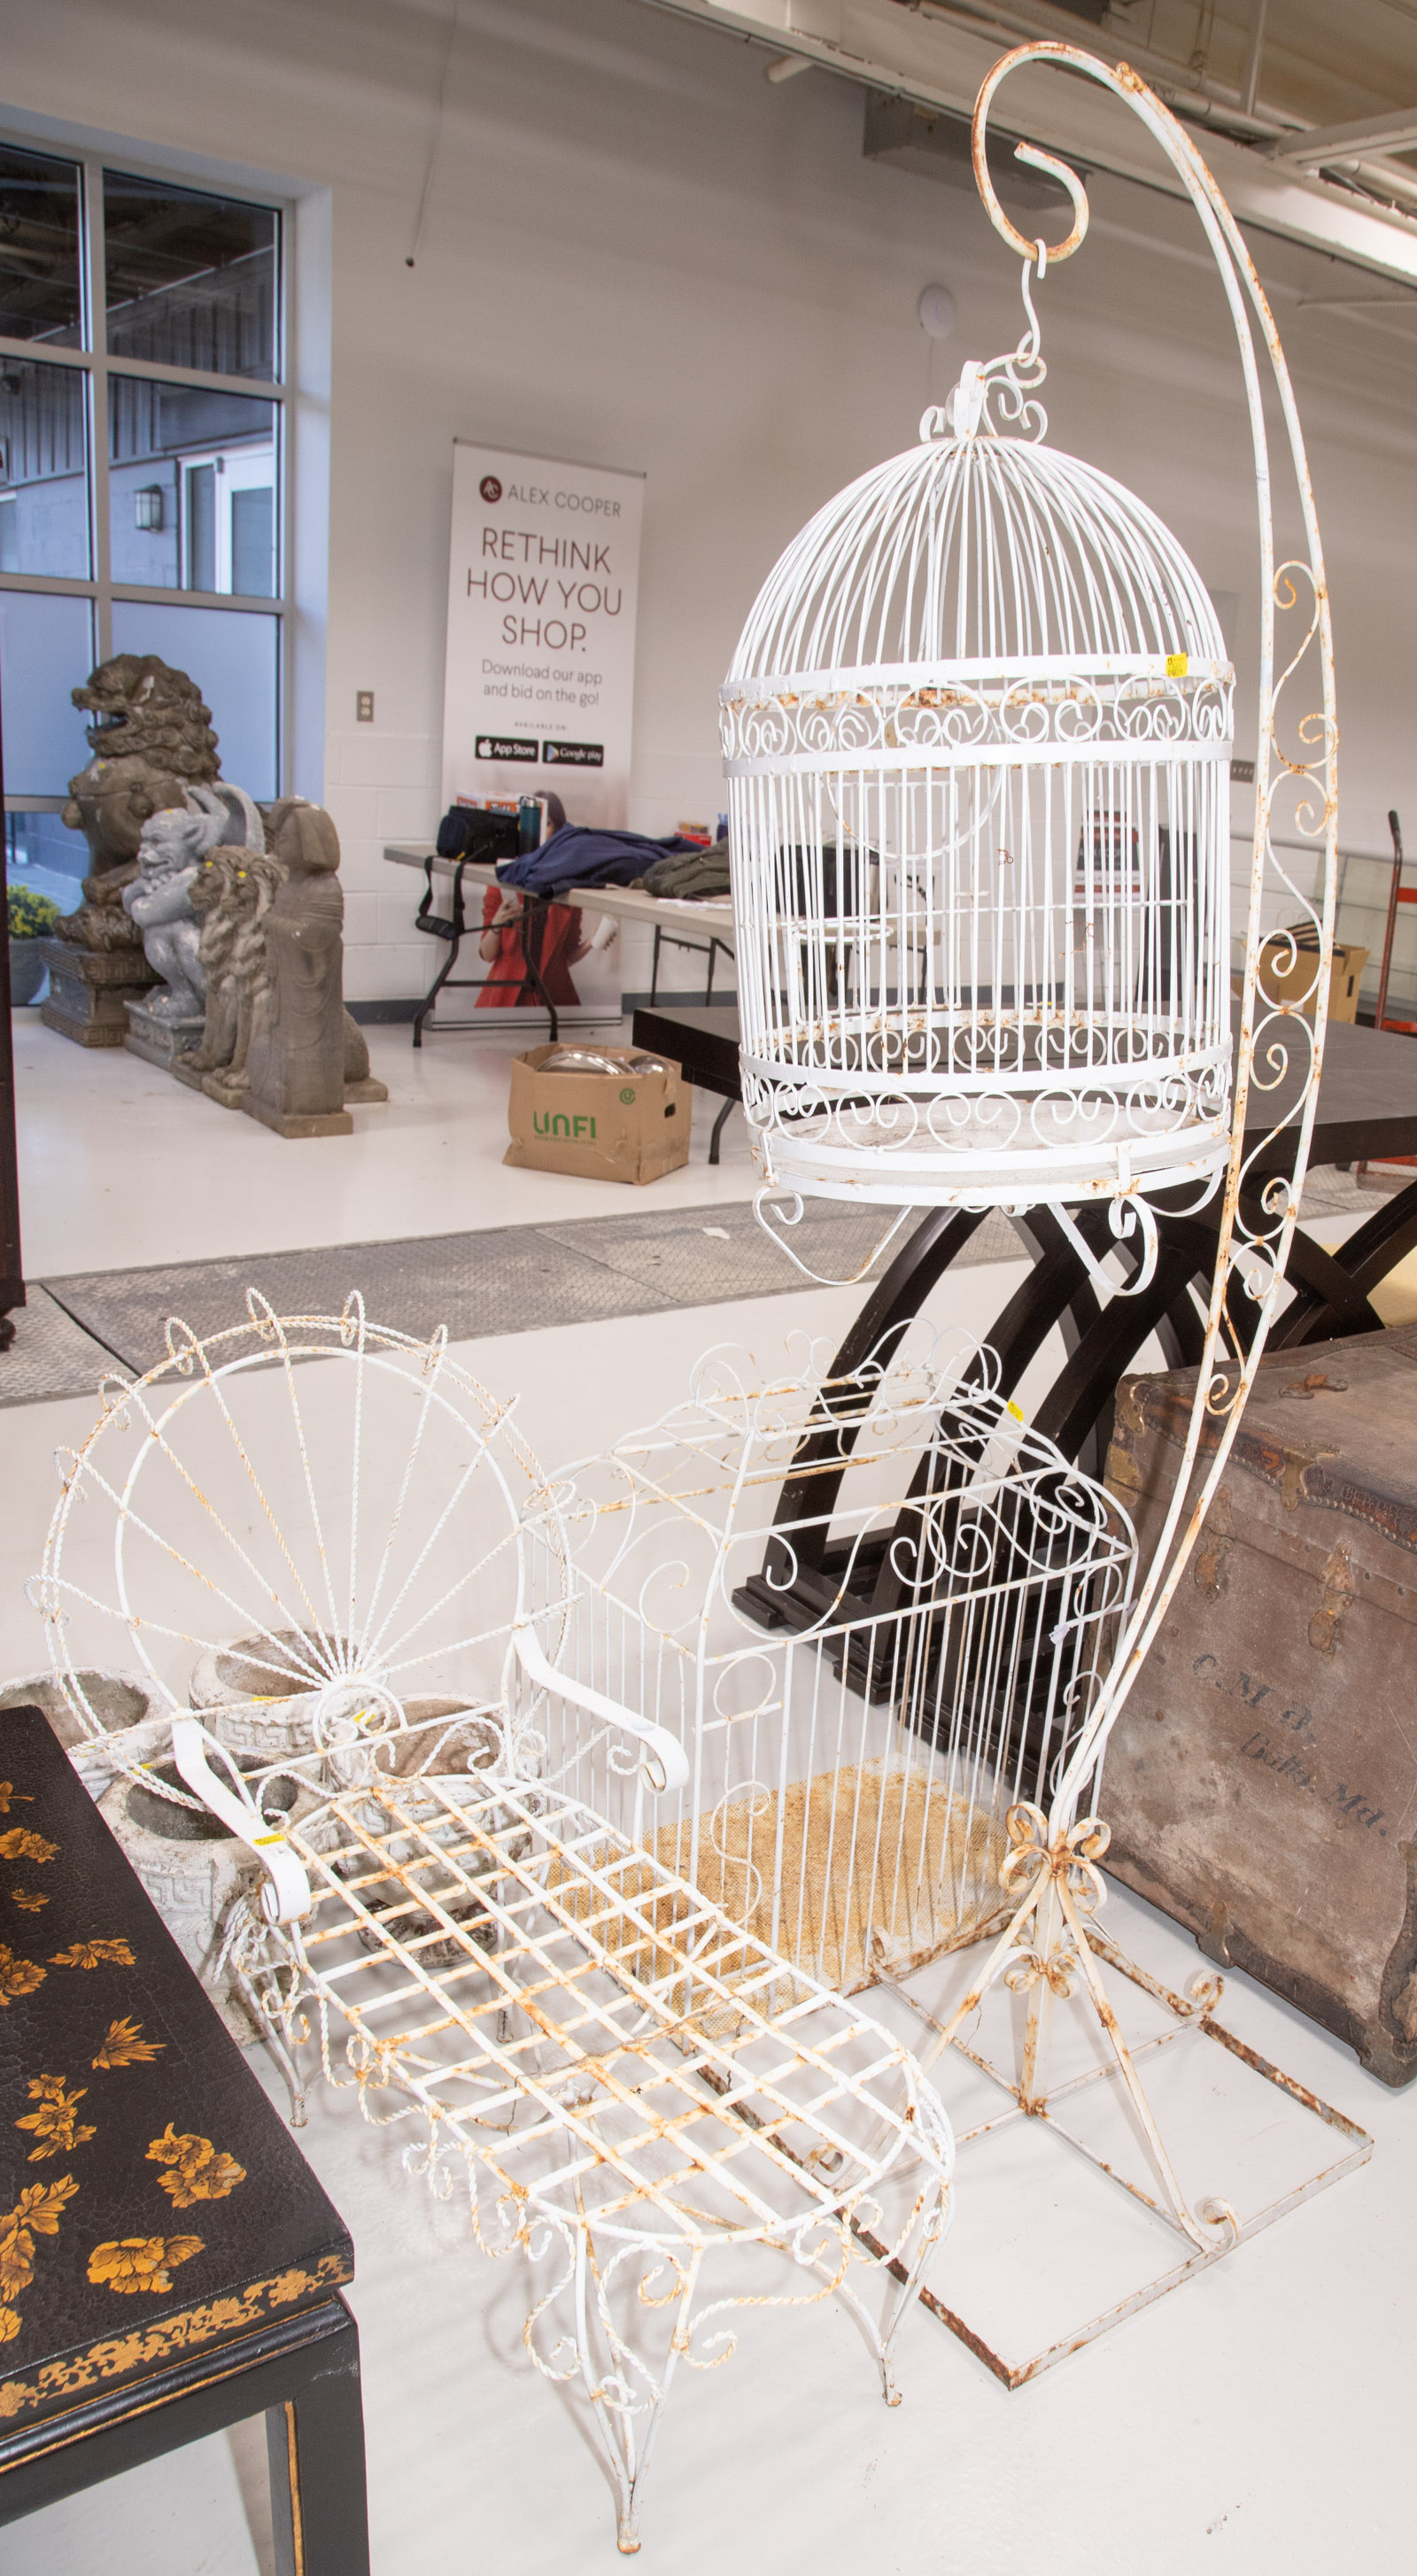 PARROT CAGE & OTHER WROUGHT IRON